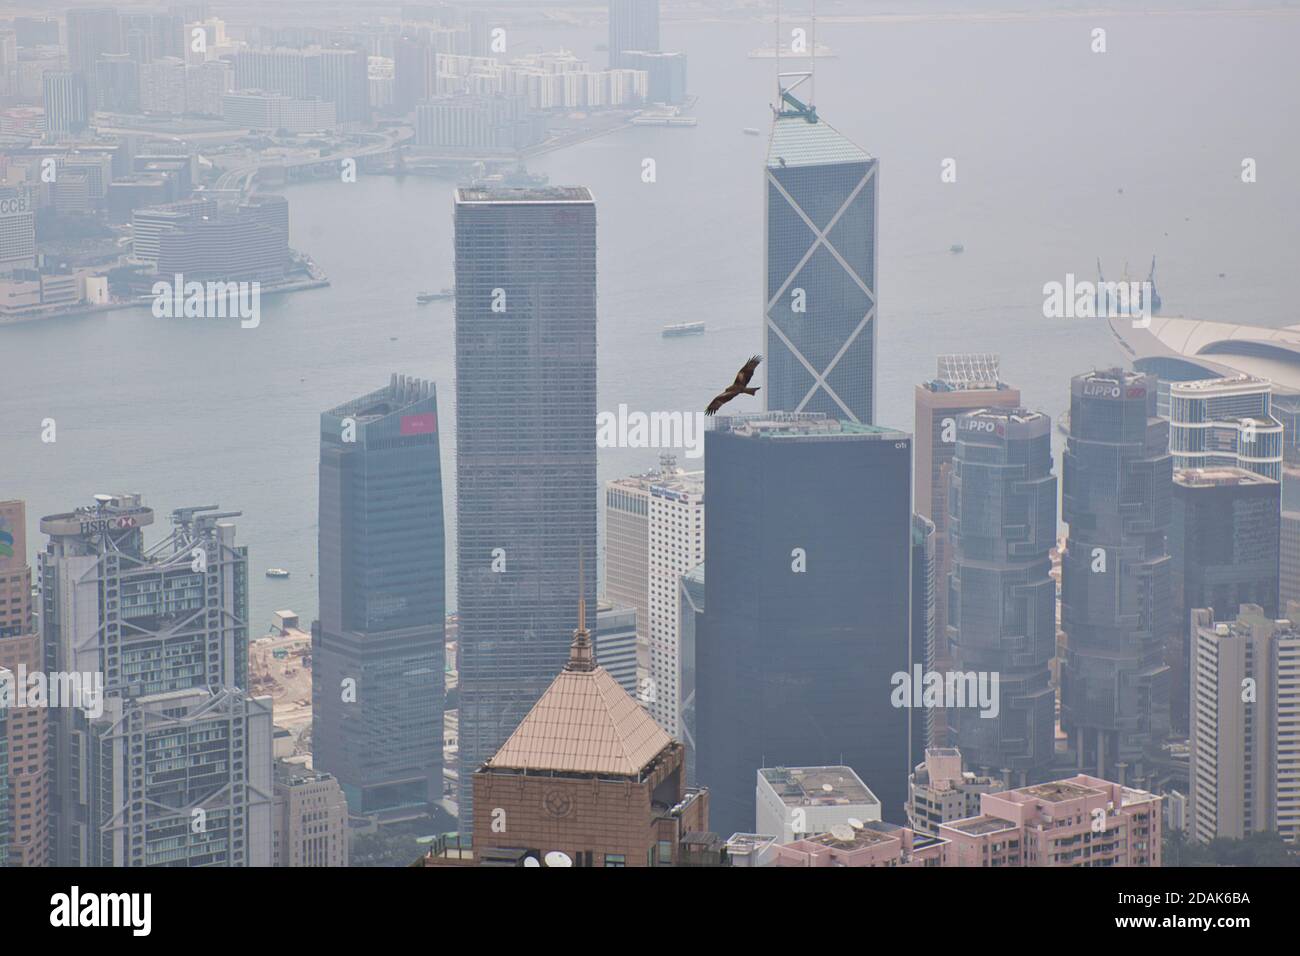 An eagle or kite soars over the high rise buildings of the central district of Hong Kong with the harbour and Kowloon in the misty background Stock Photo